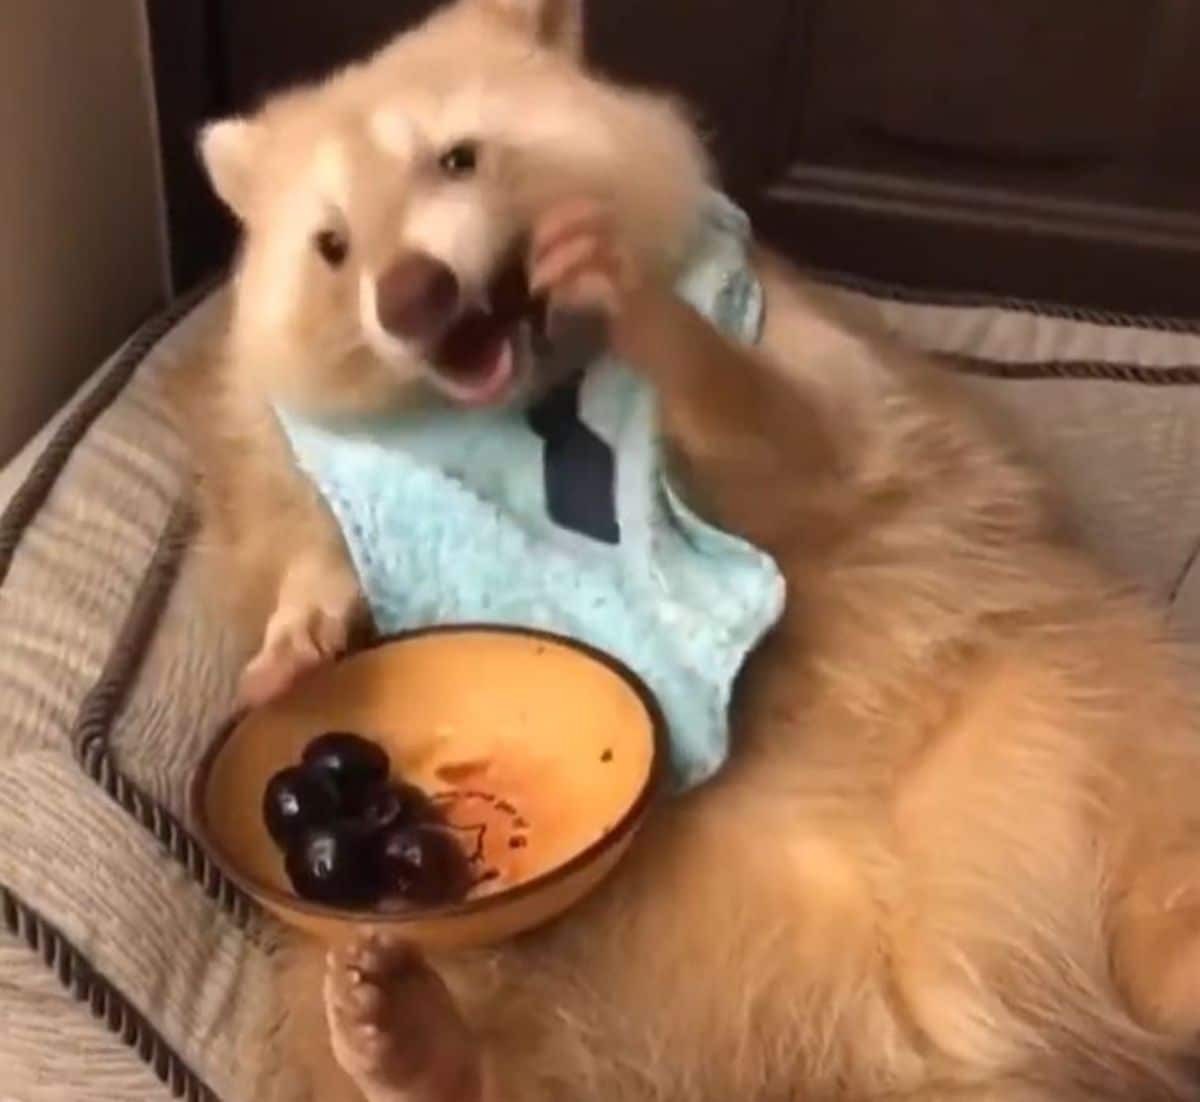 racoon wearing a blue bib sitting on a couch against a cushion eating blueberries from a bowl